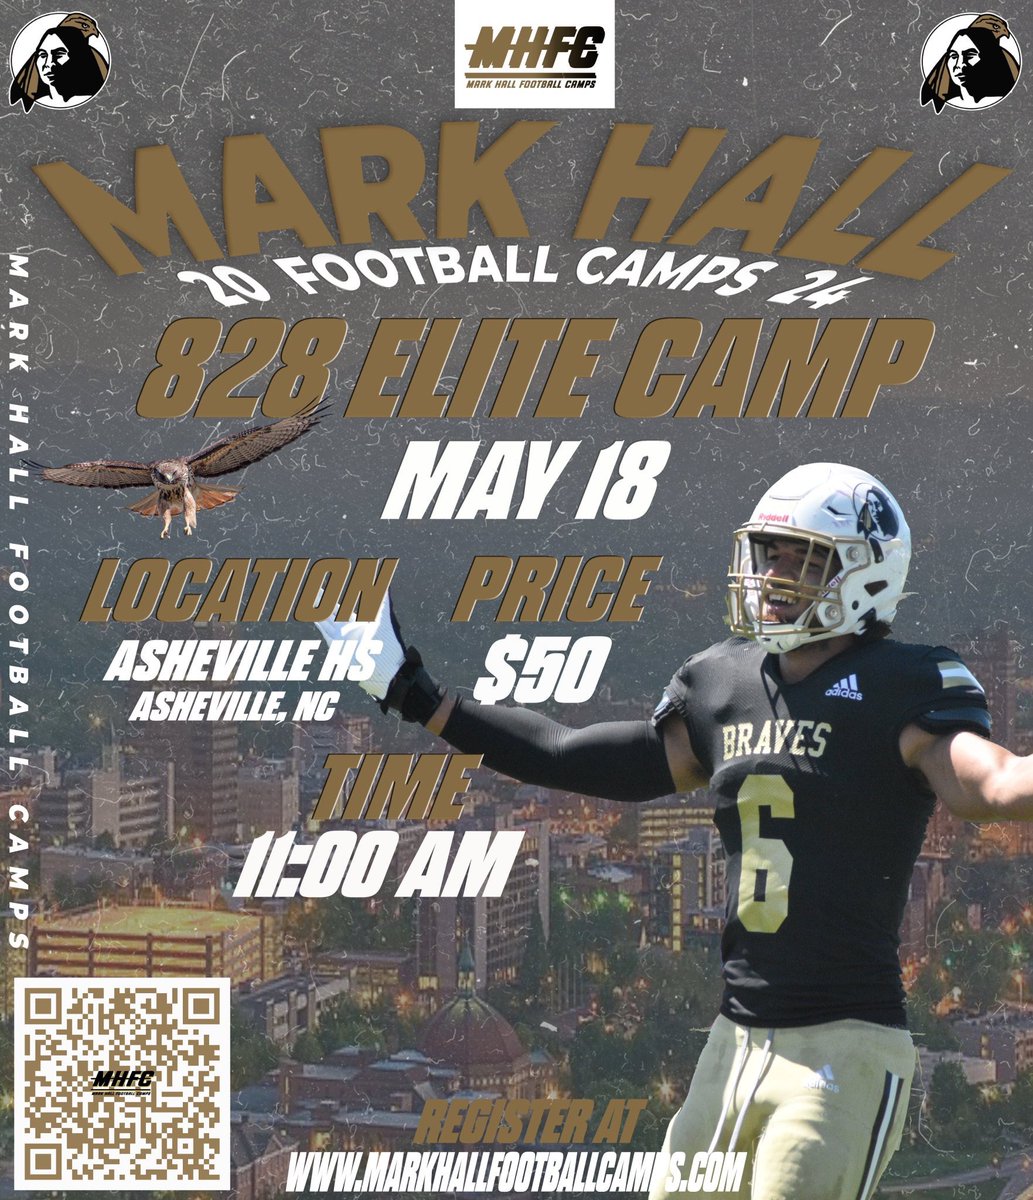 Ample opportunity for you to get evaluated & coached by staff members of @UNCP_Football We’re tapping into every region in the Tar Heel State! No excuses. Come compete for a chance to join #BraveNation @NCPreps @JoelBryantHSOT @NCFootballNews markhallfootballcamps.com/blank